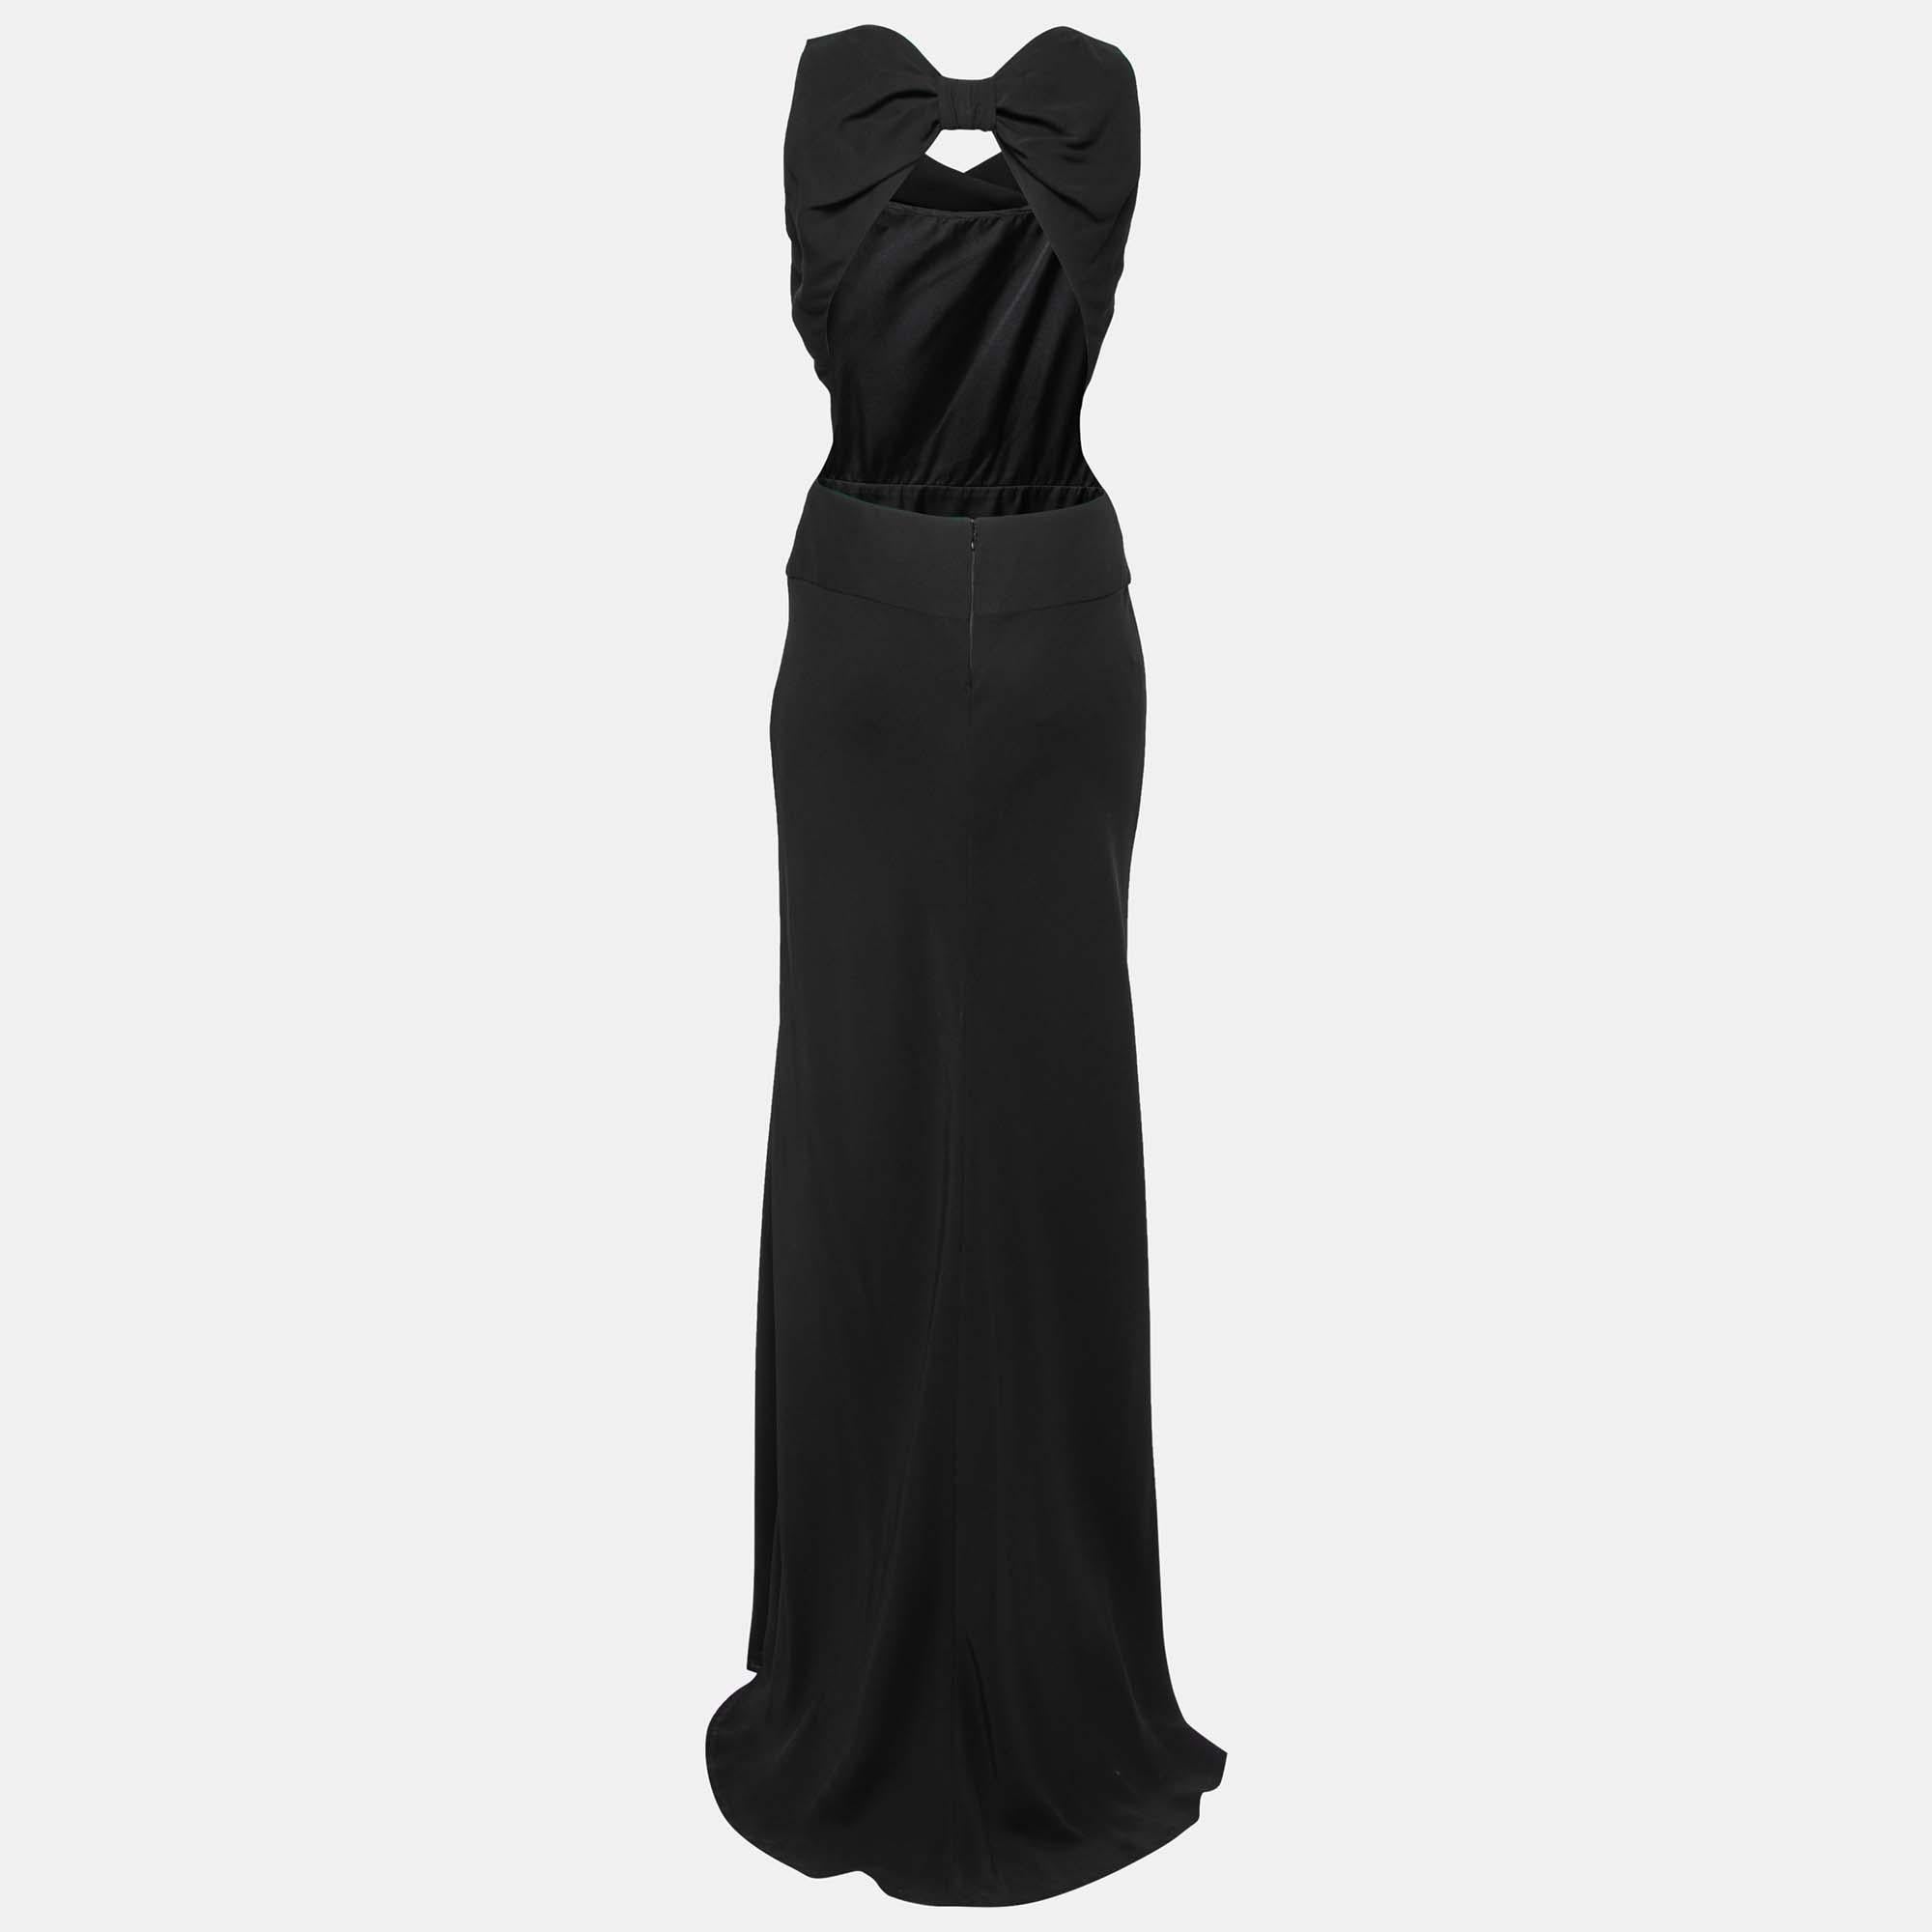 Valentino does perfect black dresses and this one is no exception. Skillfully crafted from crepe, the sleeveless dress is a deep rich black in color. It displays a cut-out back and a bow detail. It is perfect for formal dinner parties.

Includes: